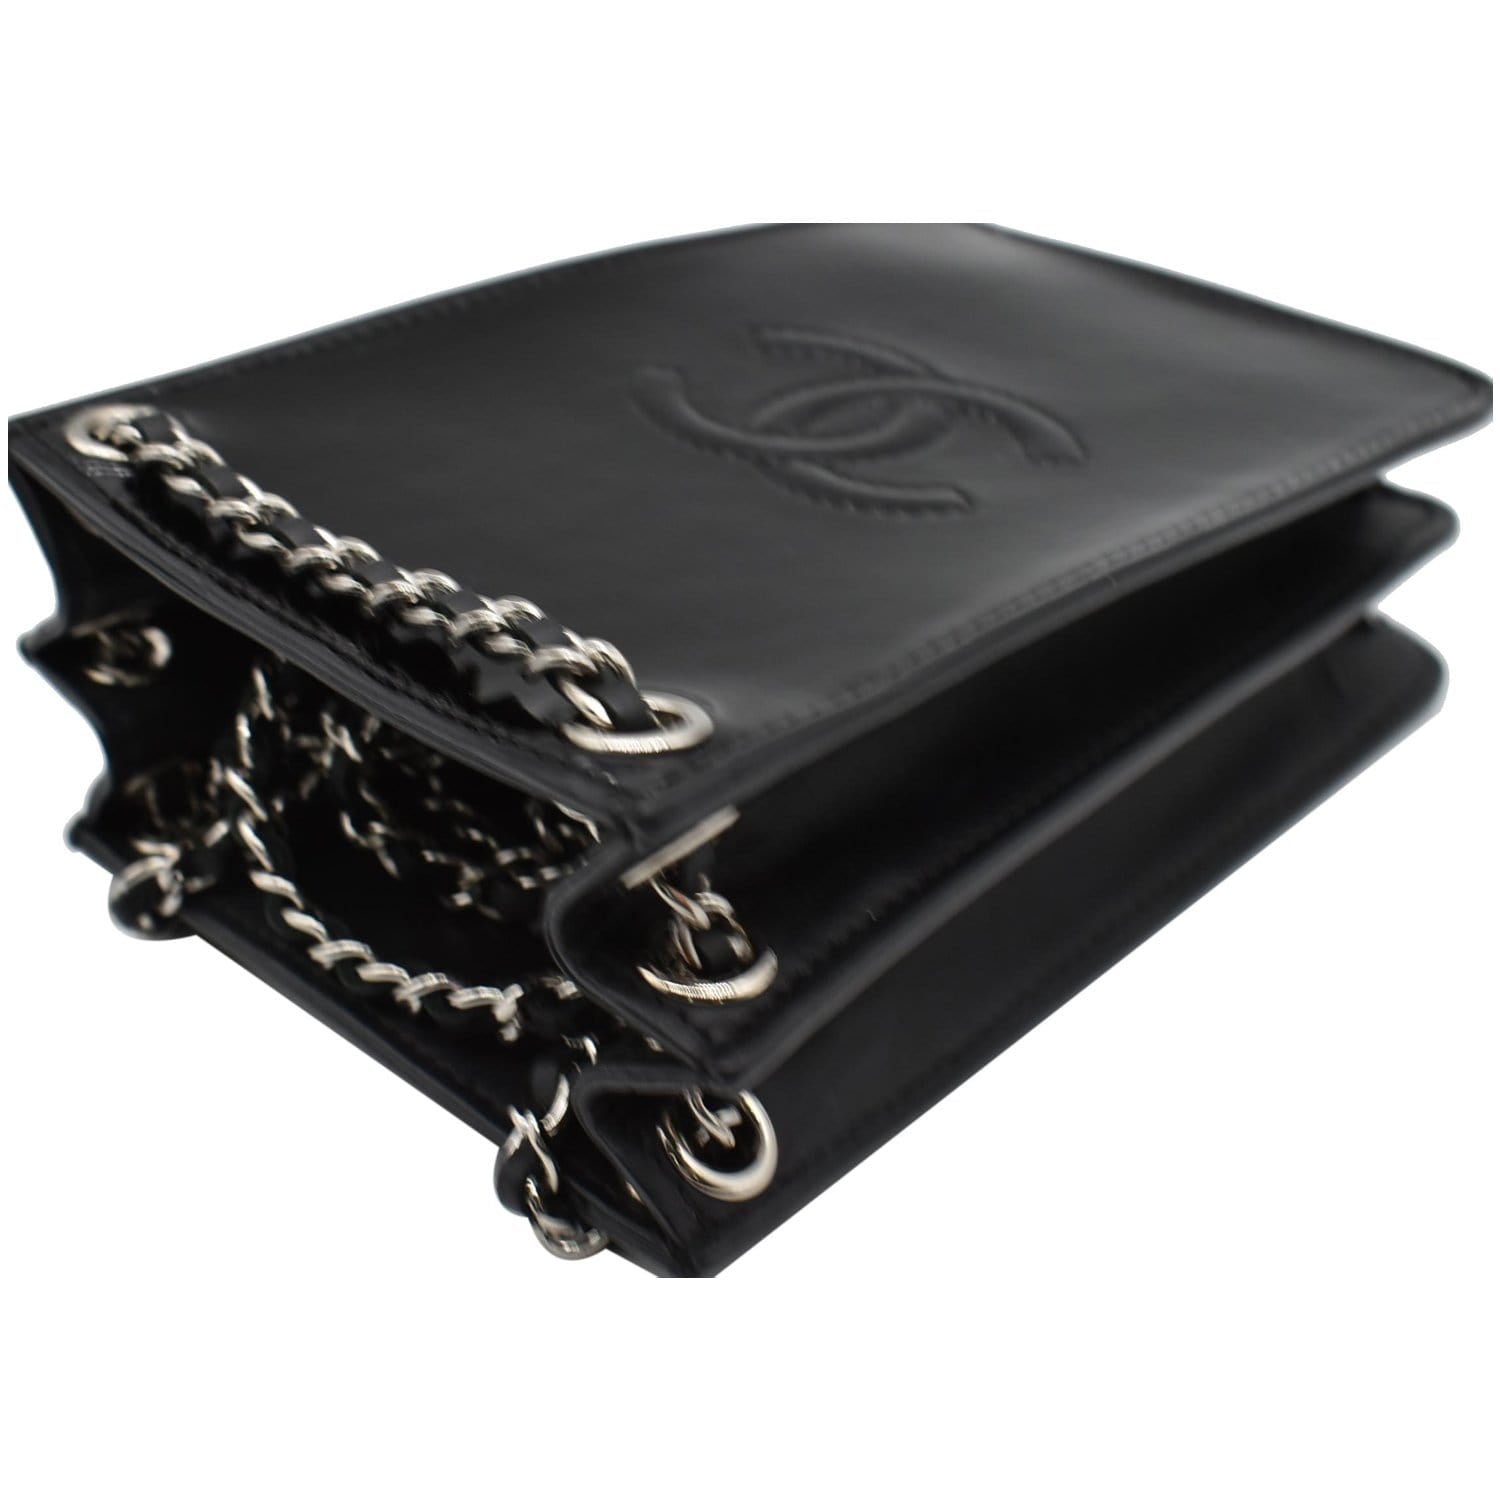 CHANEL, Accessories, 0 Auth Vintage Chanel Phone Case With Chain